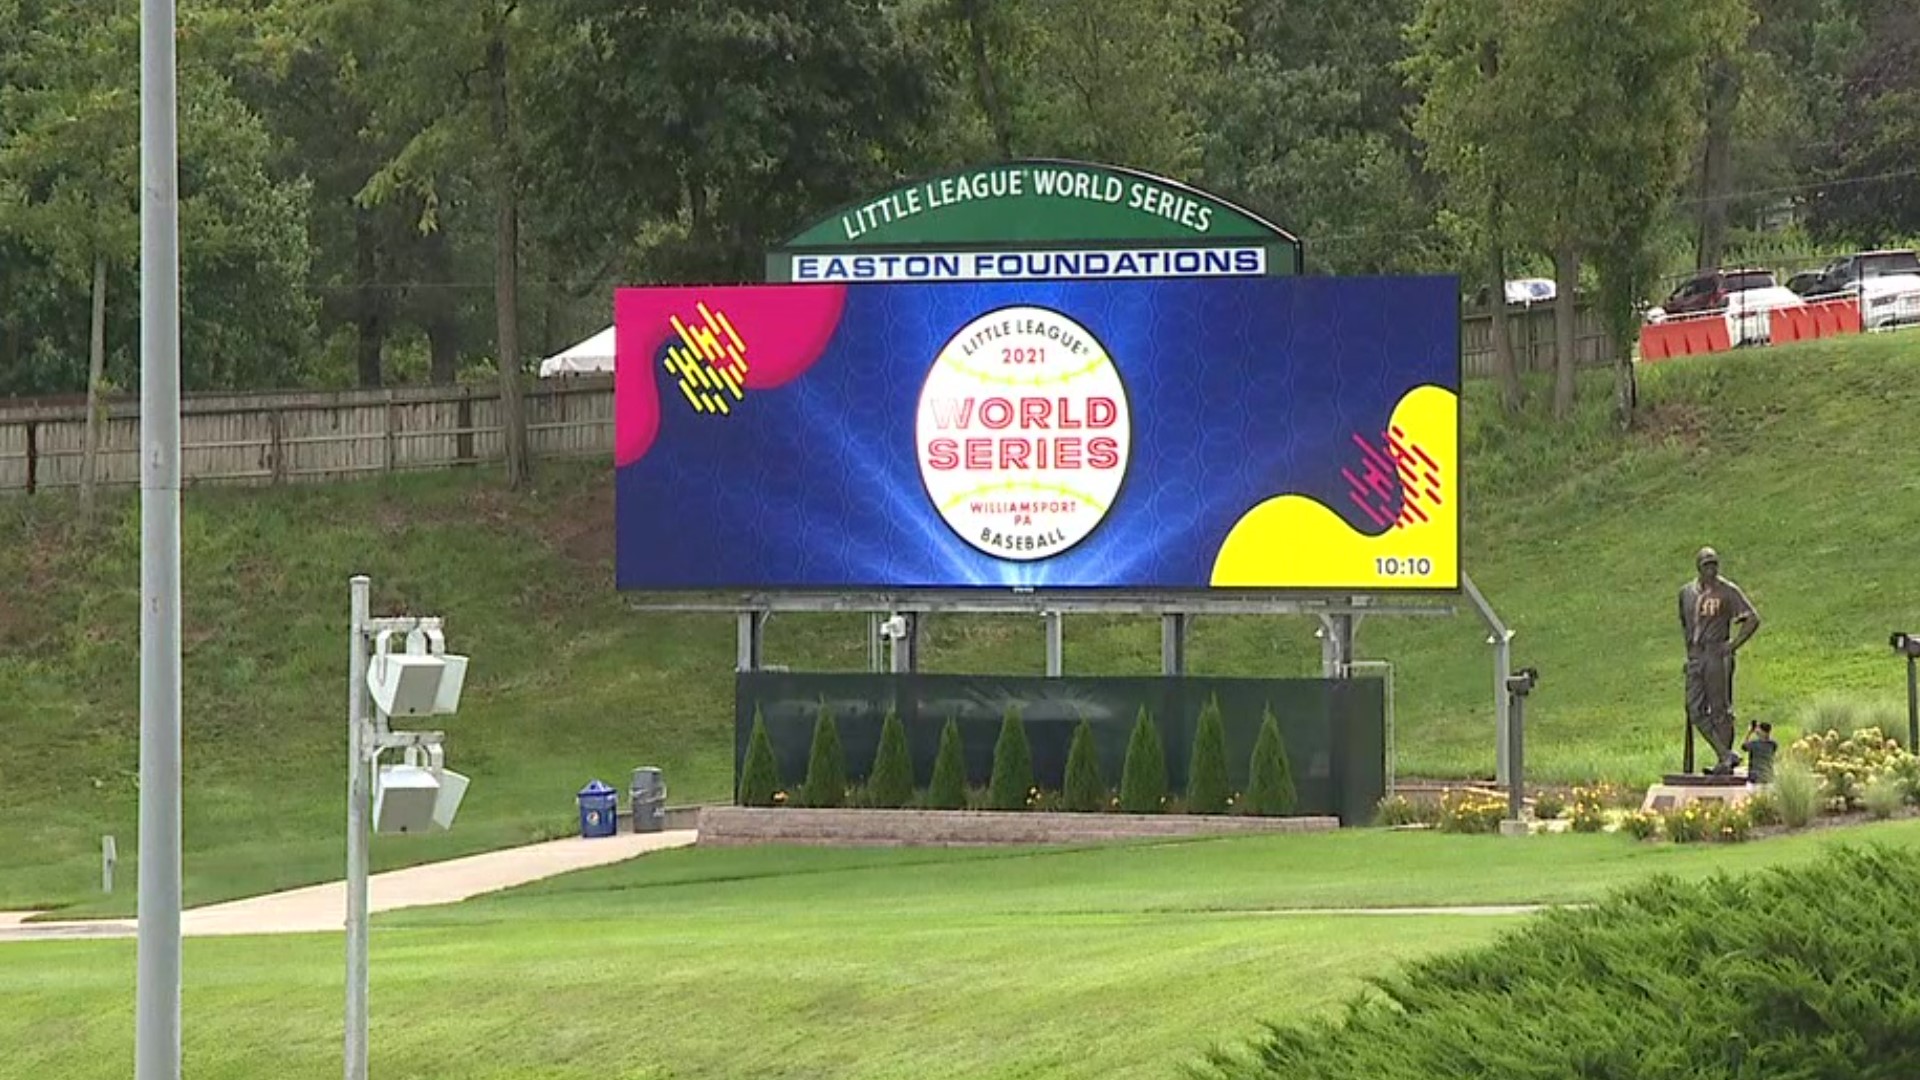 The tournament gets underway Thursday with no international teams and no fans.